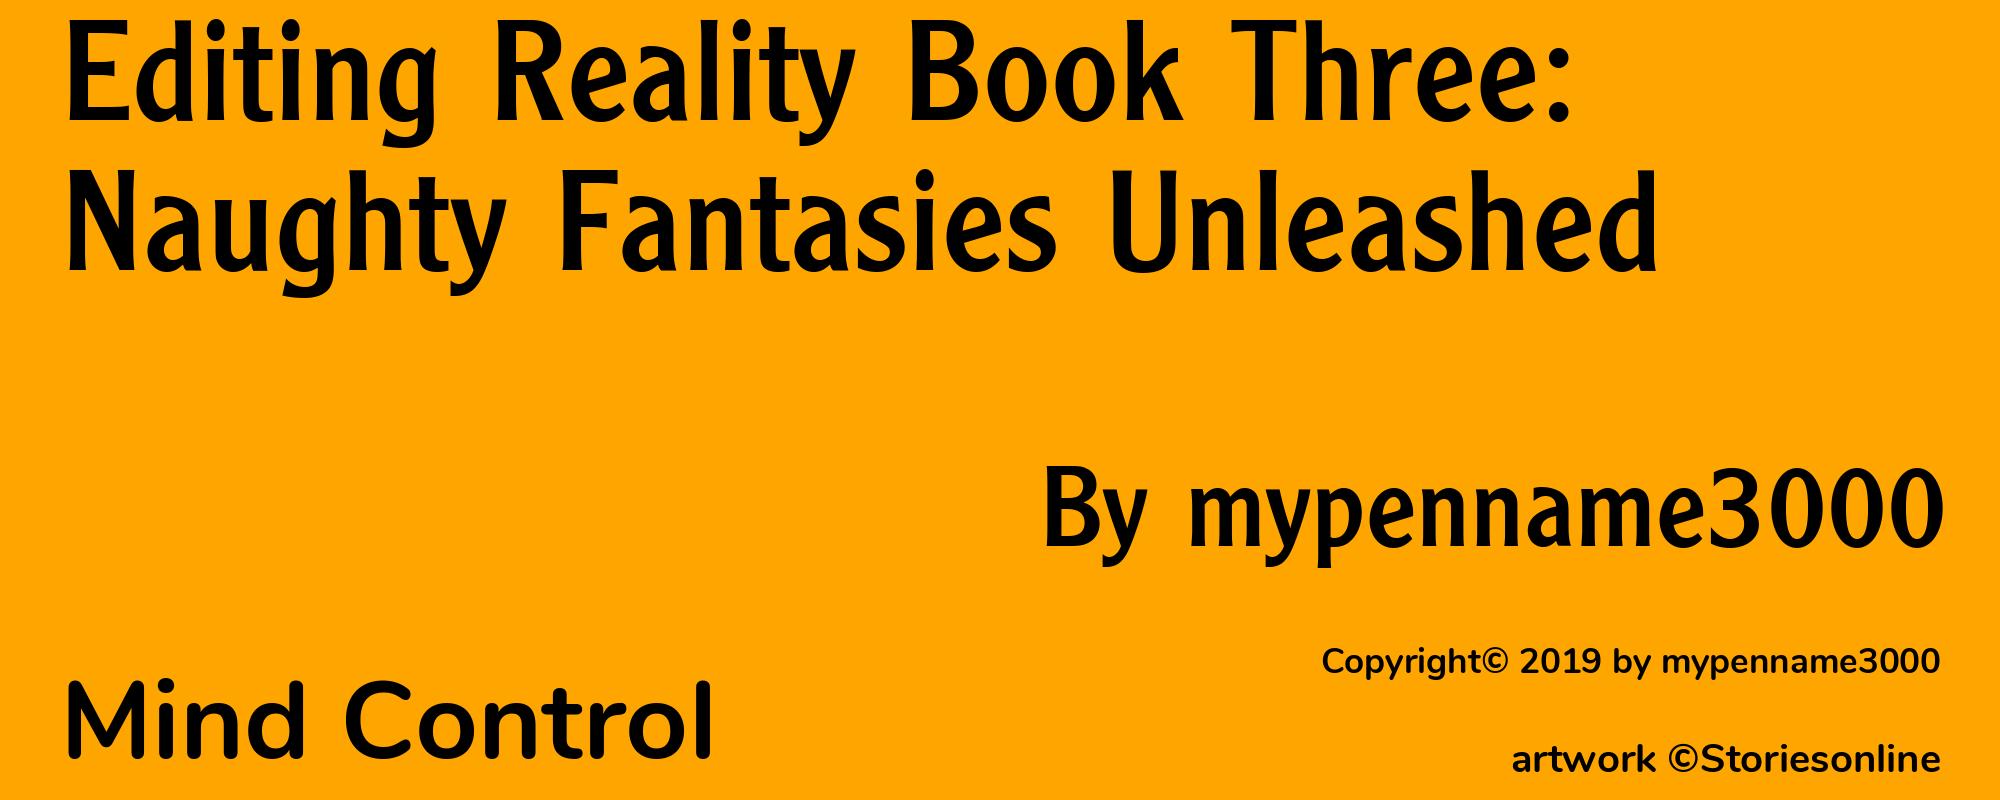 Editing Reality Book Three: Naughty Fantasies Unleashed - Cover